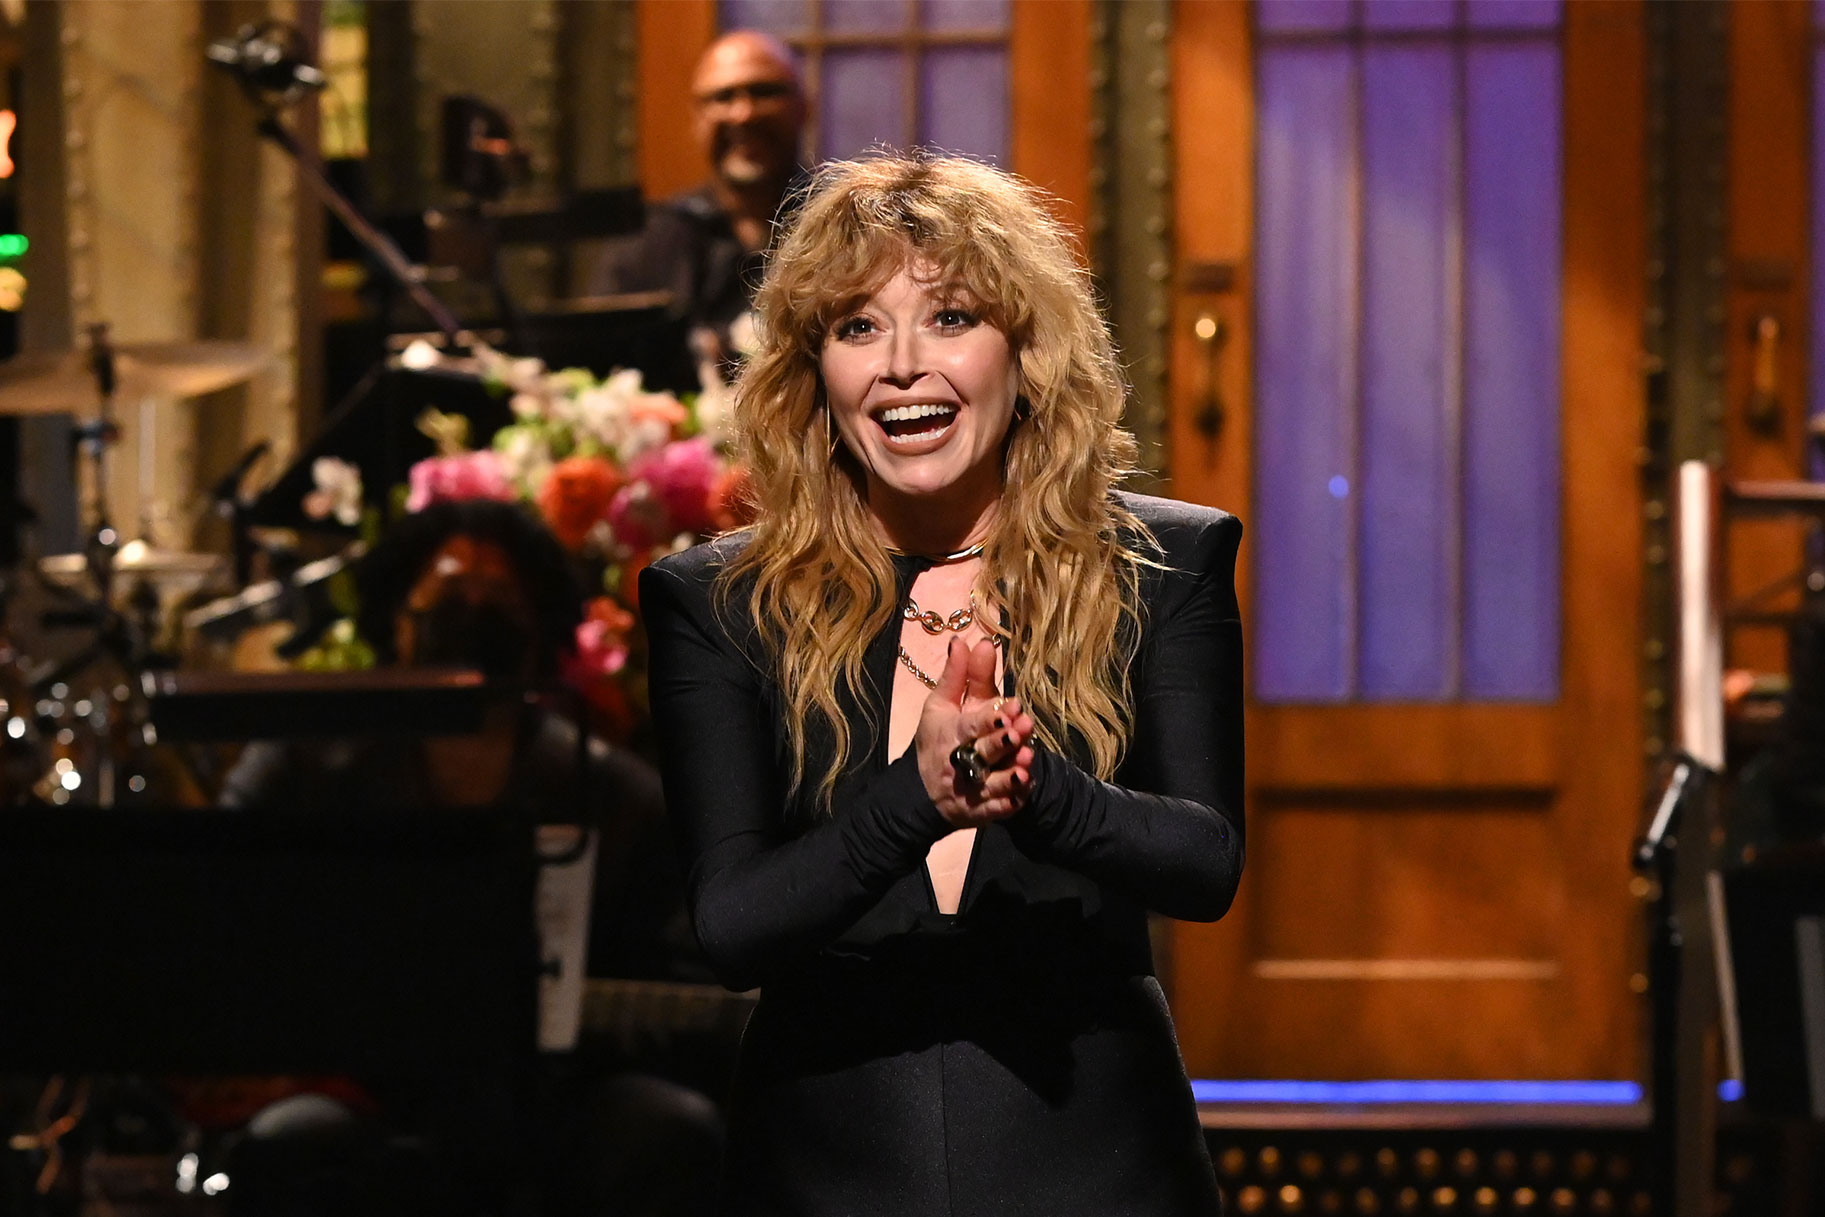 Natasha Lyonne during her opening monologue on the SNL stage